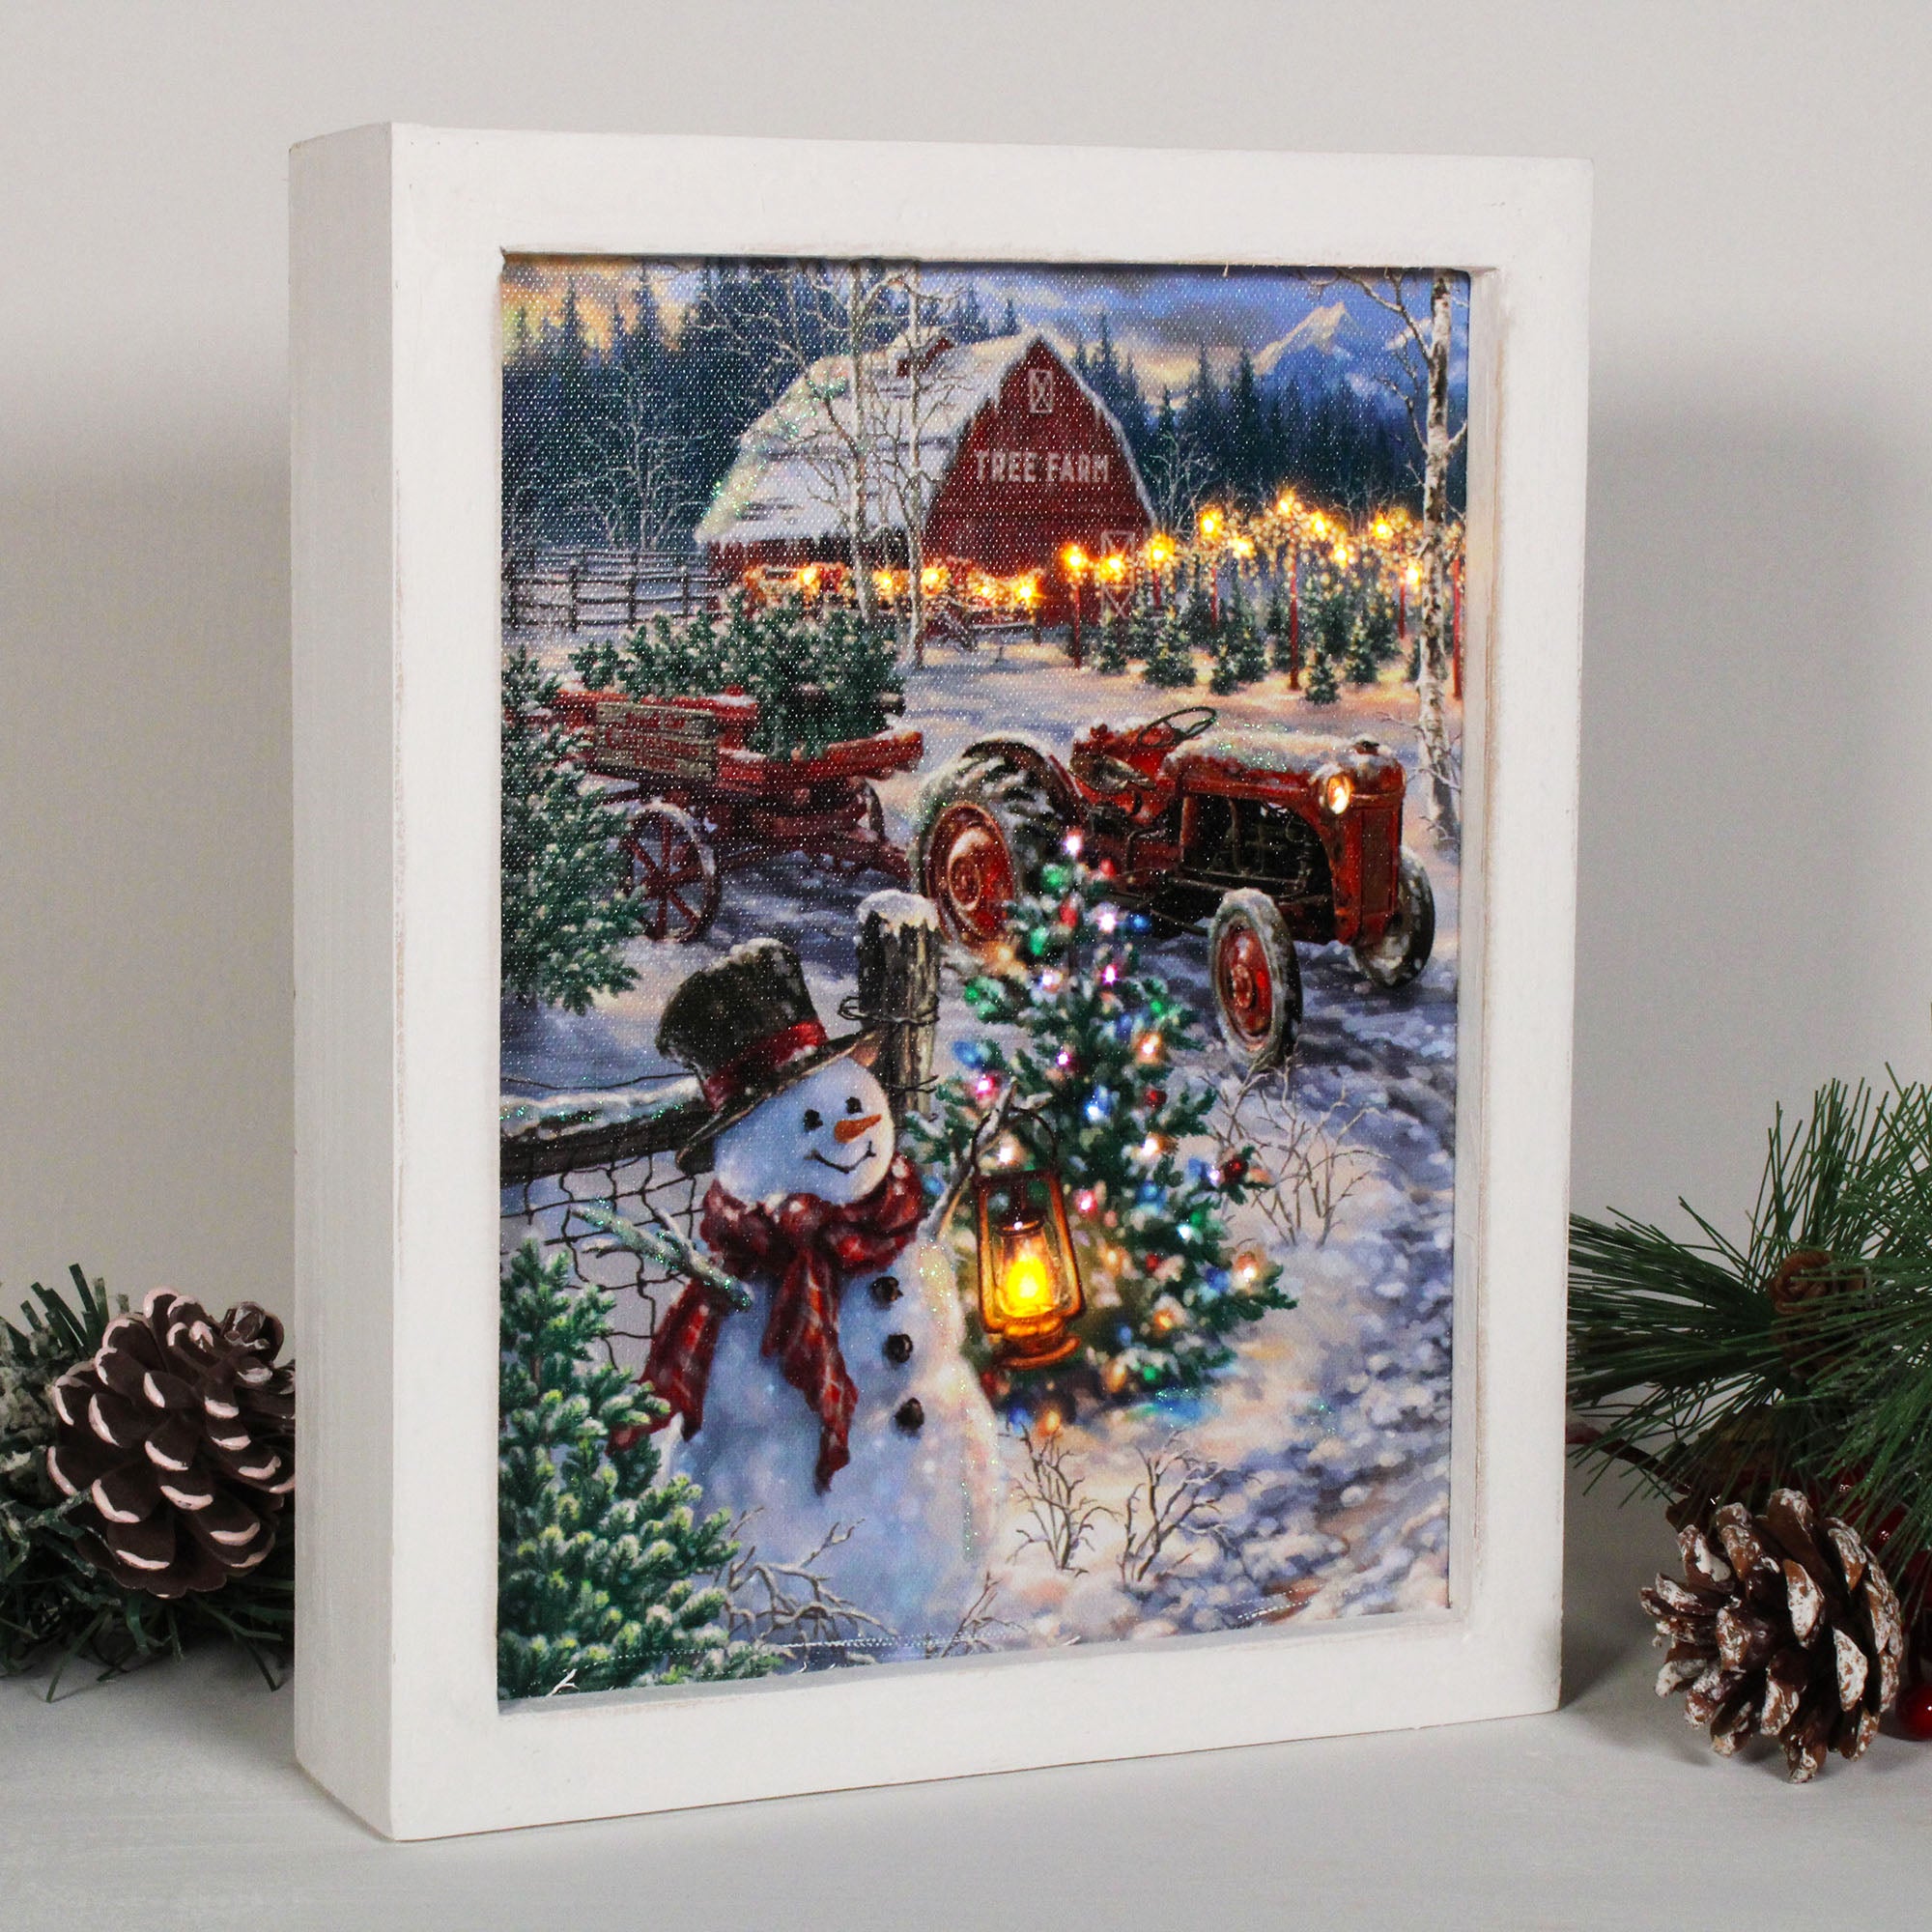 This charming piece features a happy snowman standing proudly amidst a beautiful winter wonderland. Dressed in a top hat, scarf, and carrying a lantern, he's ready to spread joy and cheer.  Behind him, a breathtaking scene unfolds - a picturesque Christmas tree farm filled with rows of stunning evergreens. The closest tree is adorned with bright, twinkling lights, adding a warm and cozy glow to the scene. And in the distance, a barn and tractor can be seen.